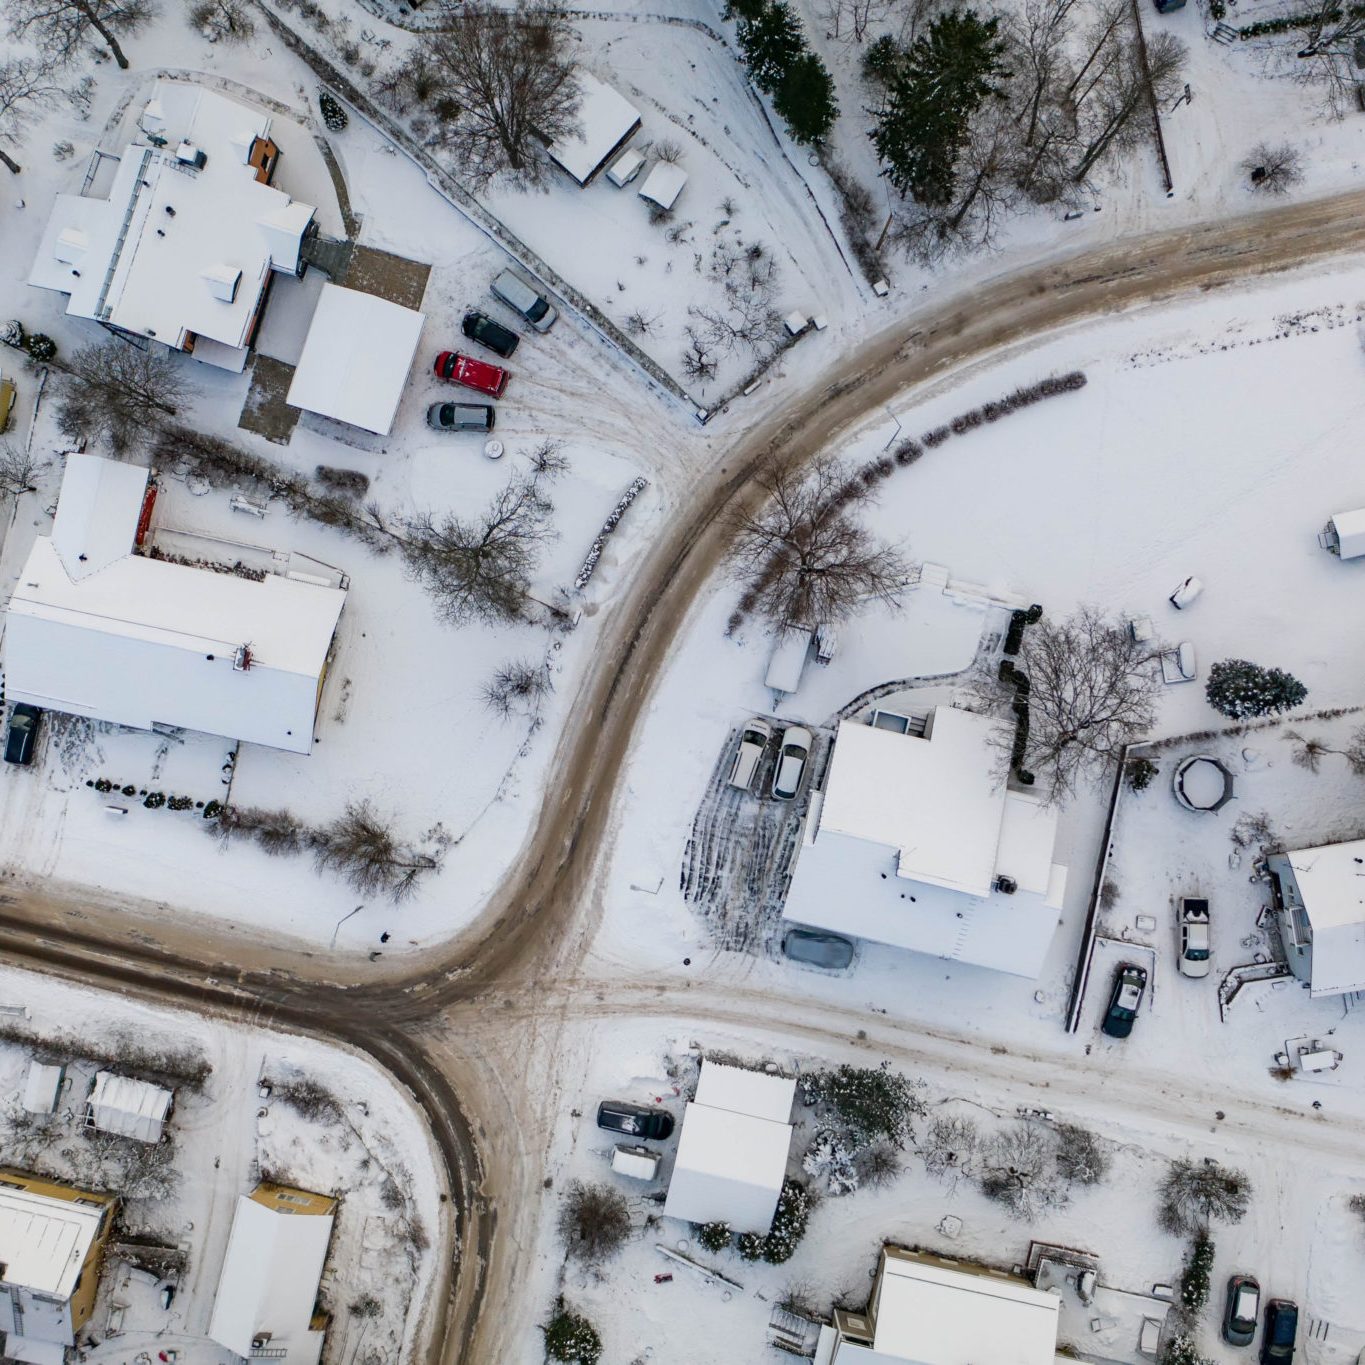 Drone,Angle,View,Of,Snowy,Suburban,Streets,And,Houses,In